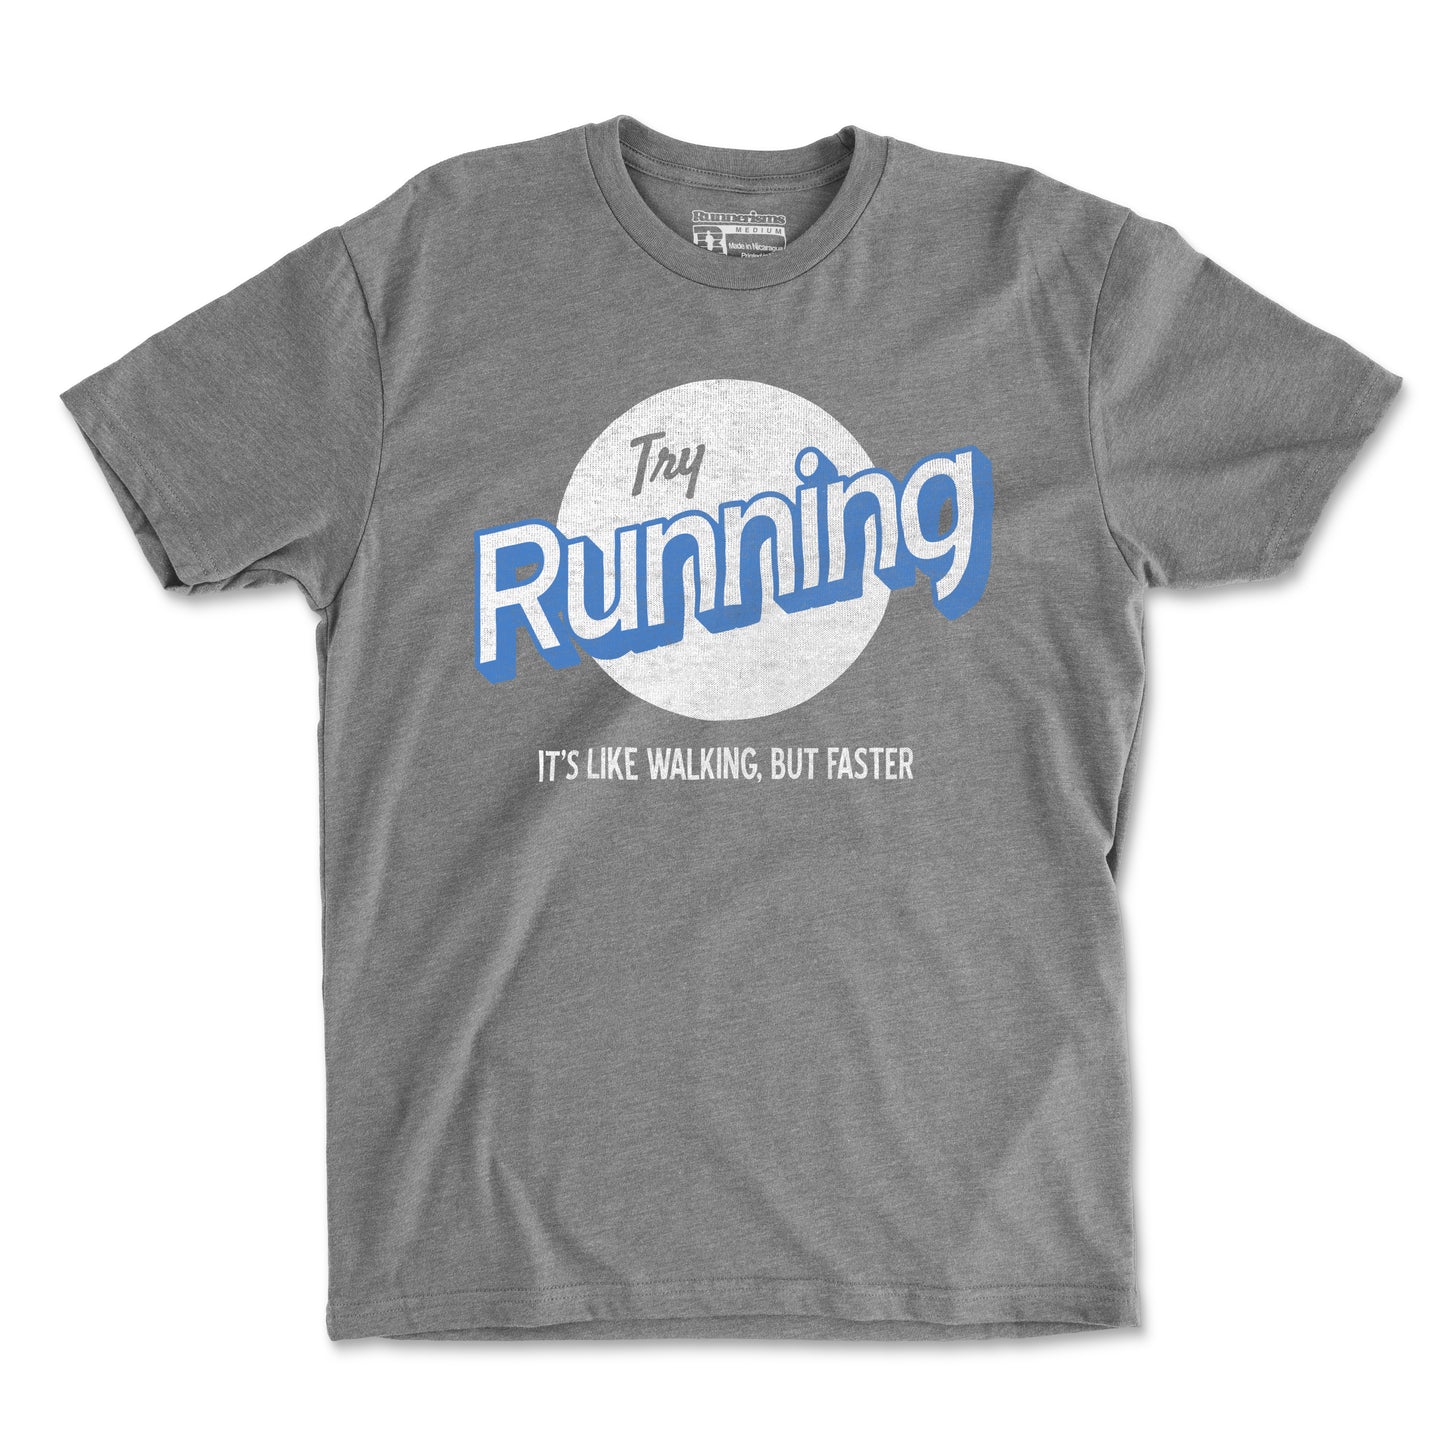 Try Running It's Like Walking But Faster - Unisex T Shirt